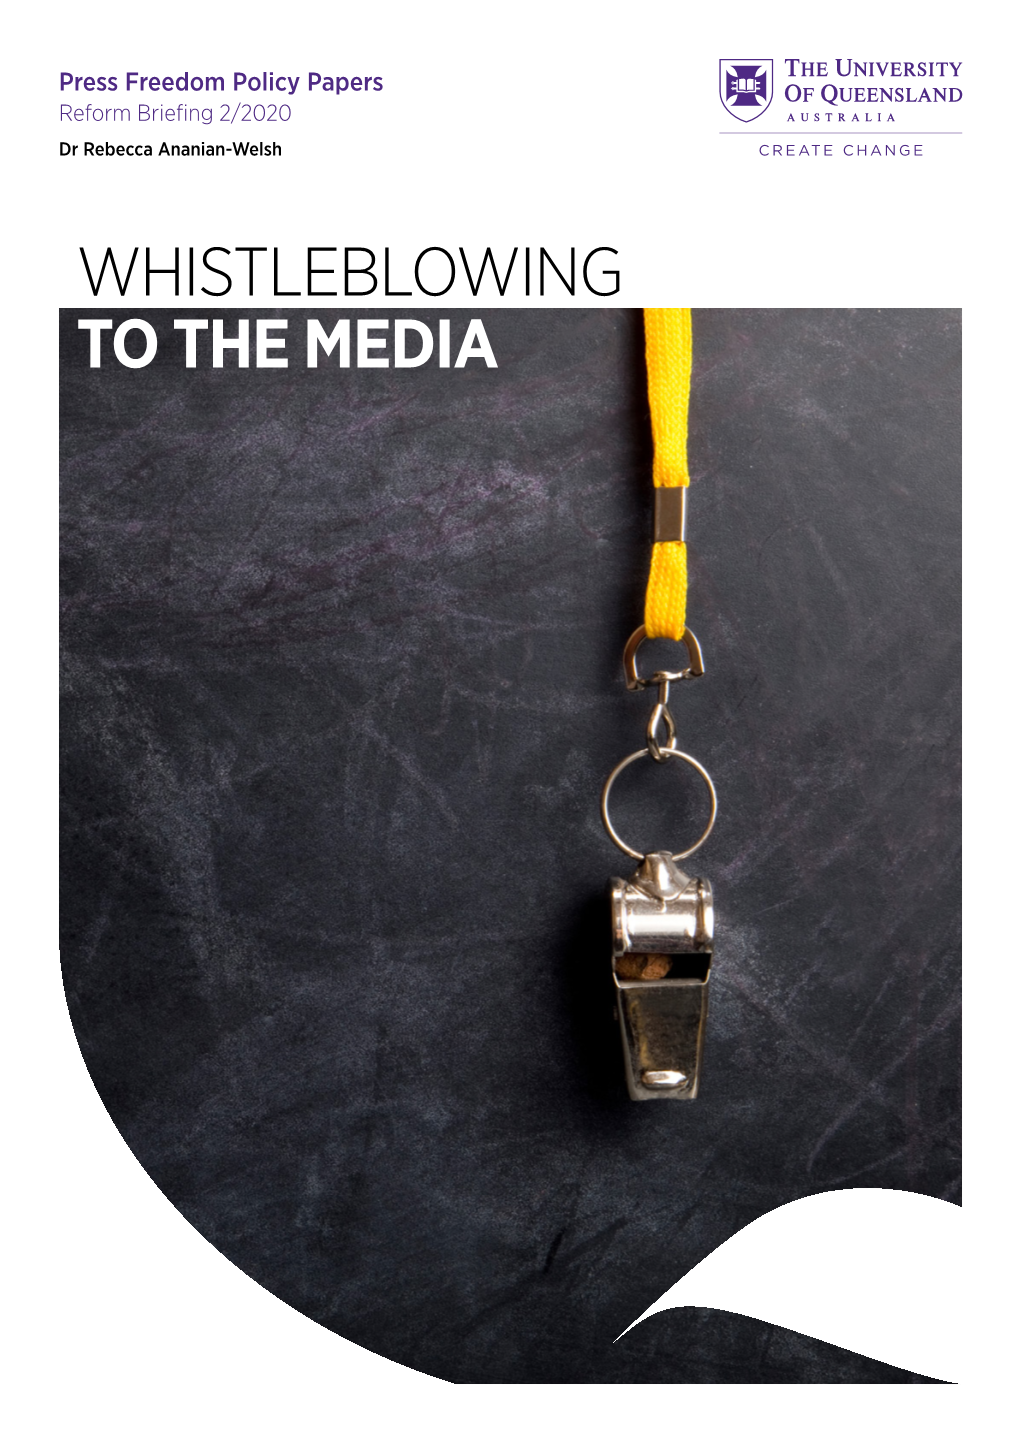 WHISTLEBLOWING to the MEDIA Press Freedom Policy Papers